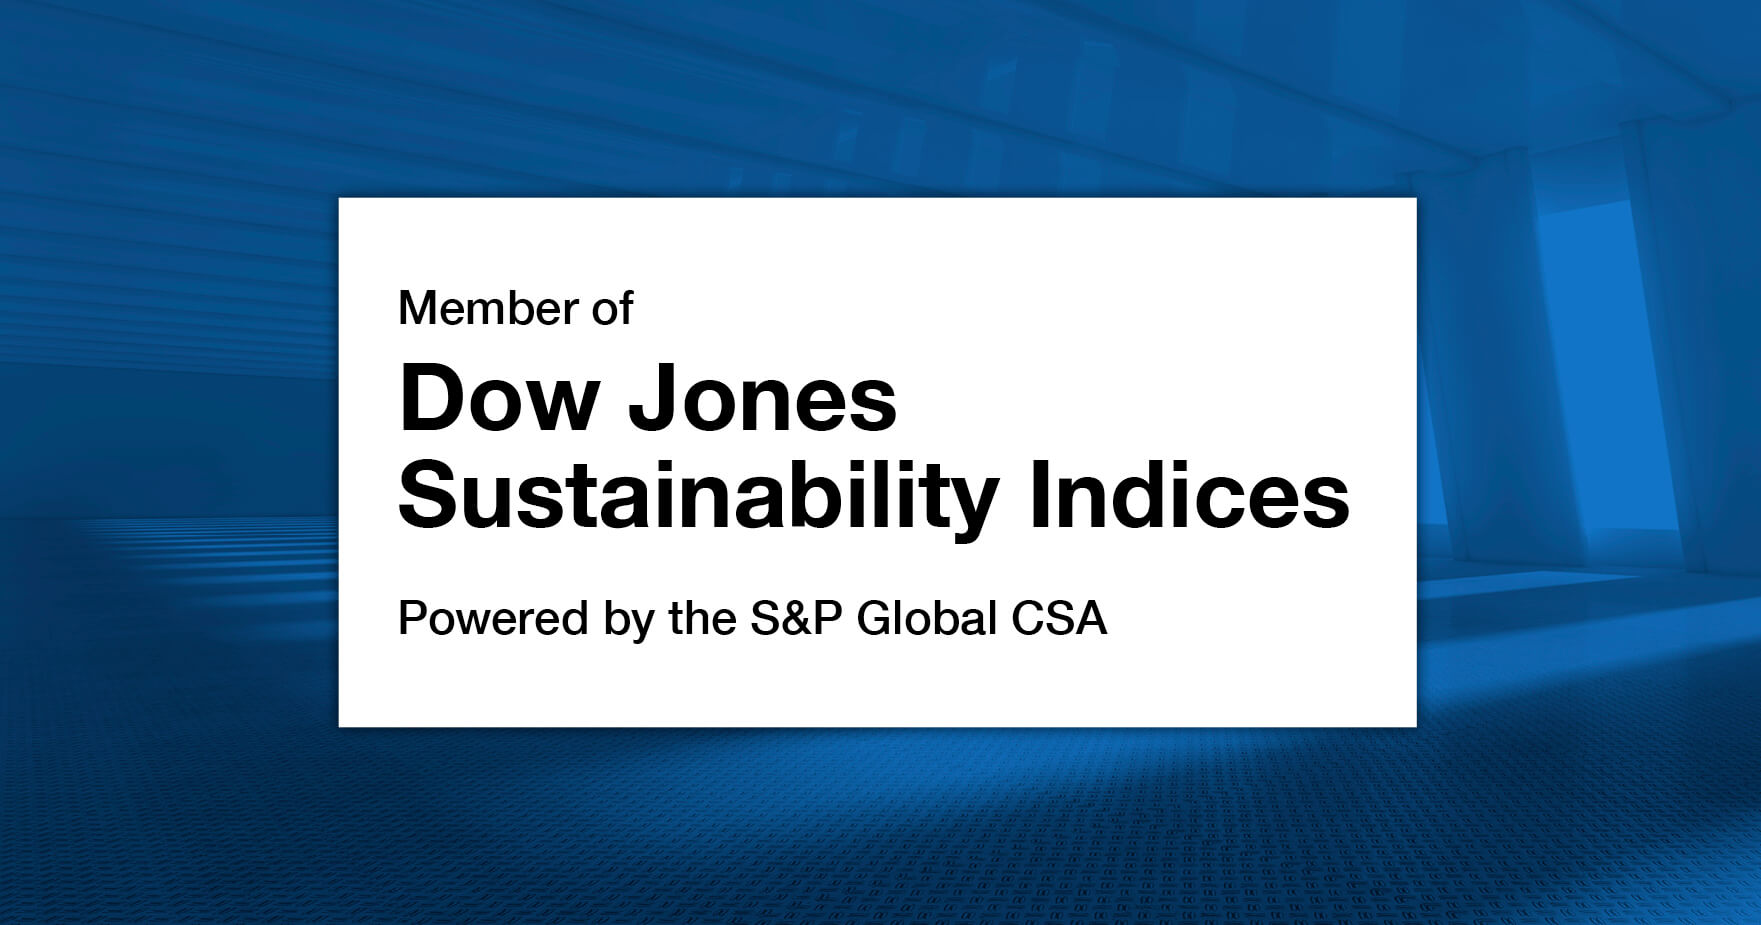 OMRON Listed in the Dow Jones Sustainability World Index for 4th